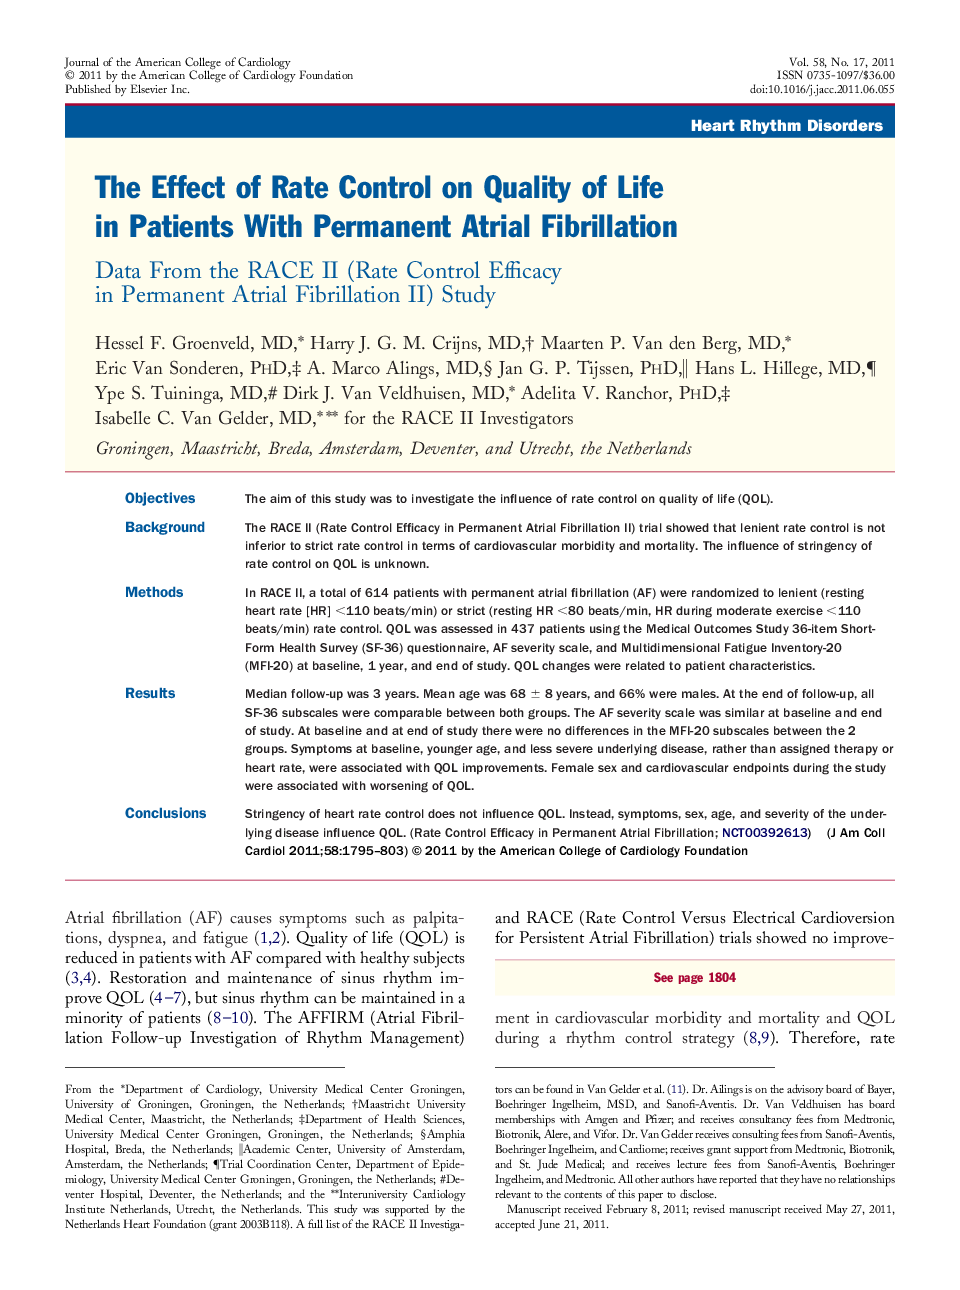 The Effect of Rate Control on Quality of Life in Patients With Permanent Atrial Fibrillation : Data From the RACE II (Rate Control Efficacy in Permanent Atrial Fibrillation II) Study